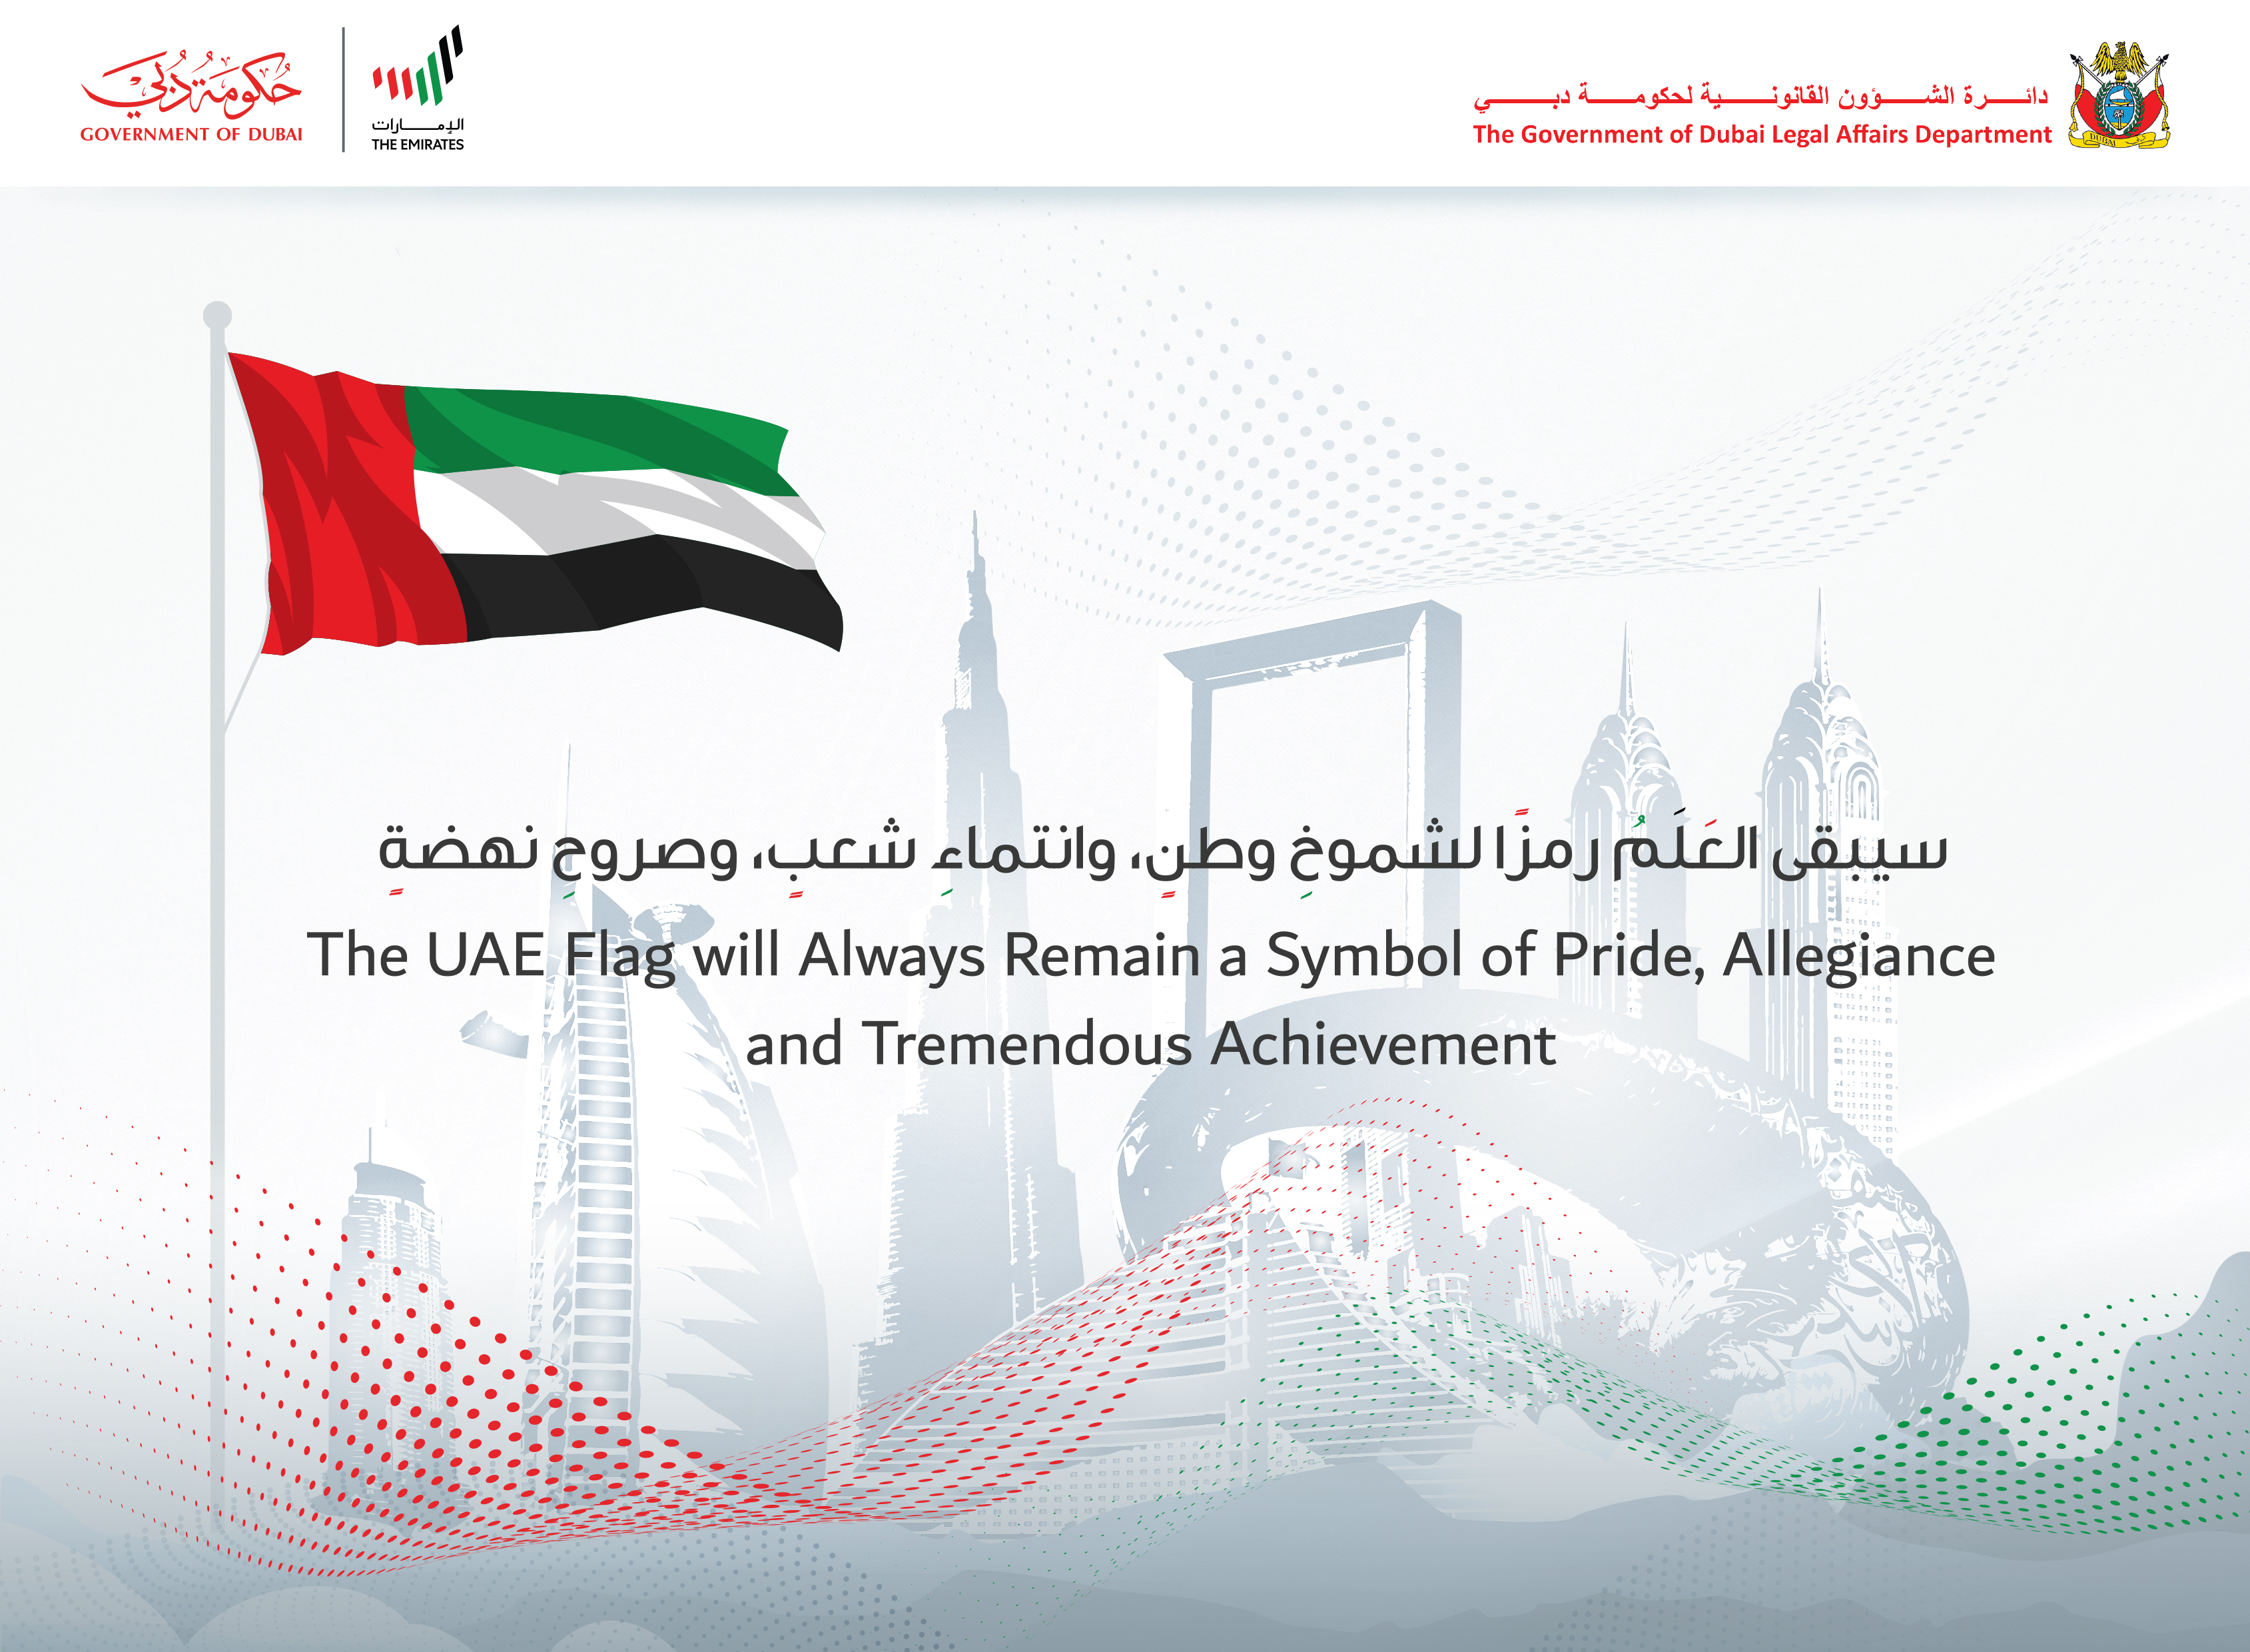 Statement of His Excellency Director General of the Government of Dubai Legal Affairs Department on the Occasion of the UAE Flag Day